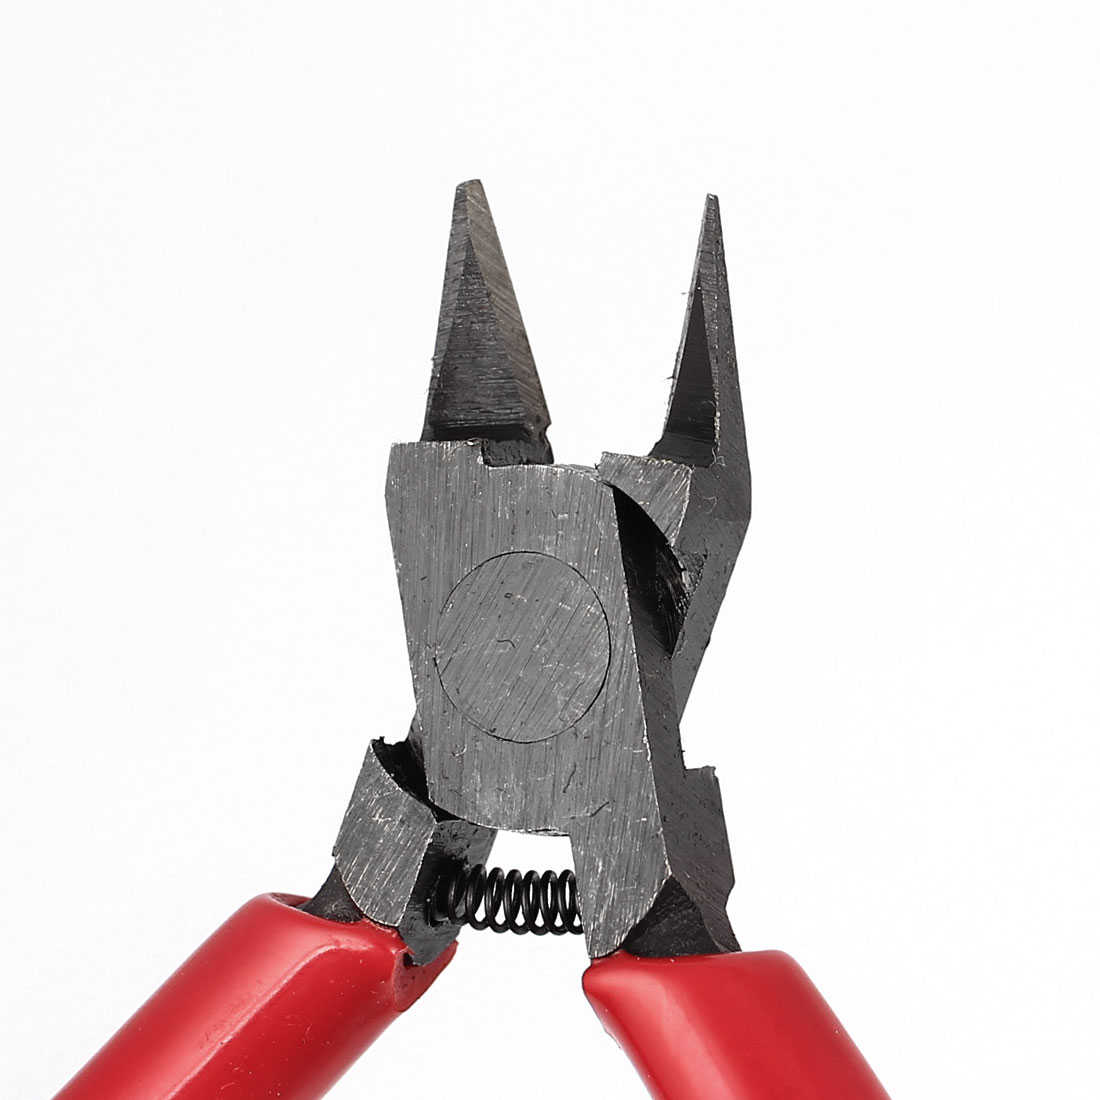 Unique Bargains Red Plastic Coated Grip Spring Loaded Side Cutter Diagonal Cutting Plier Nippers